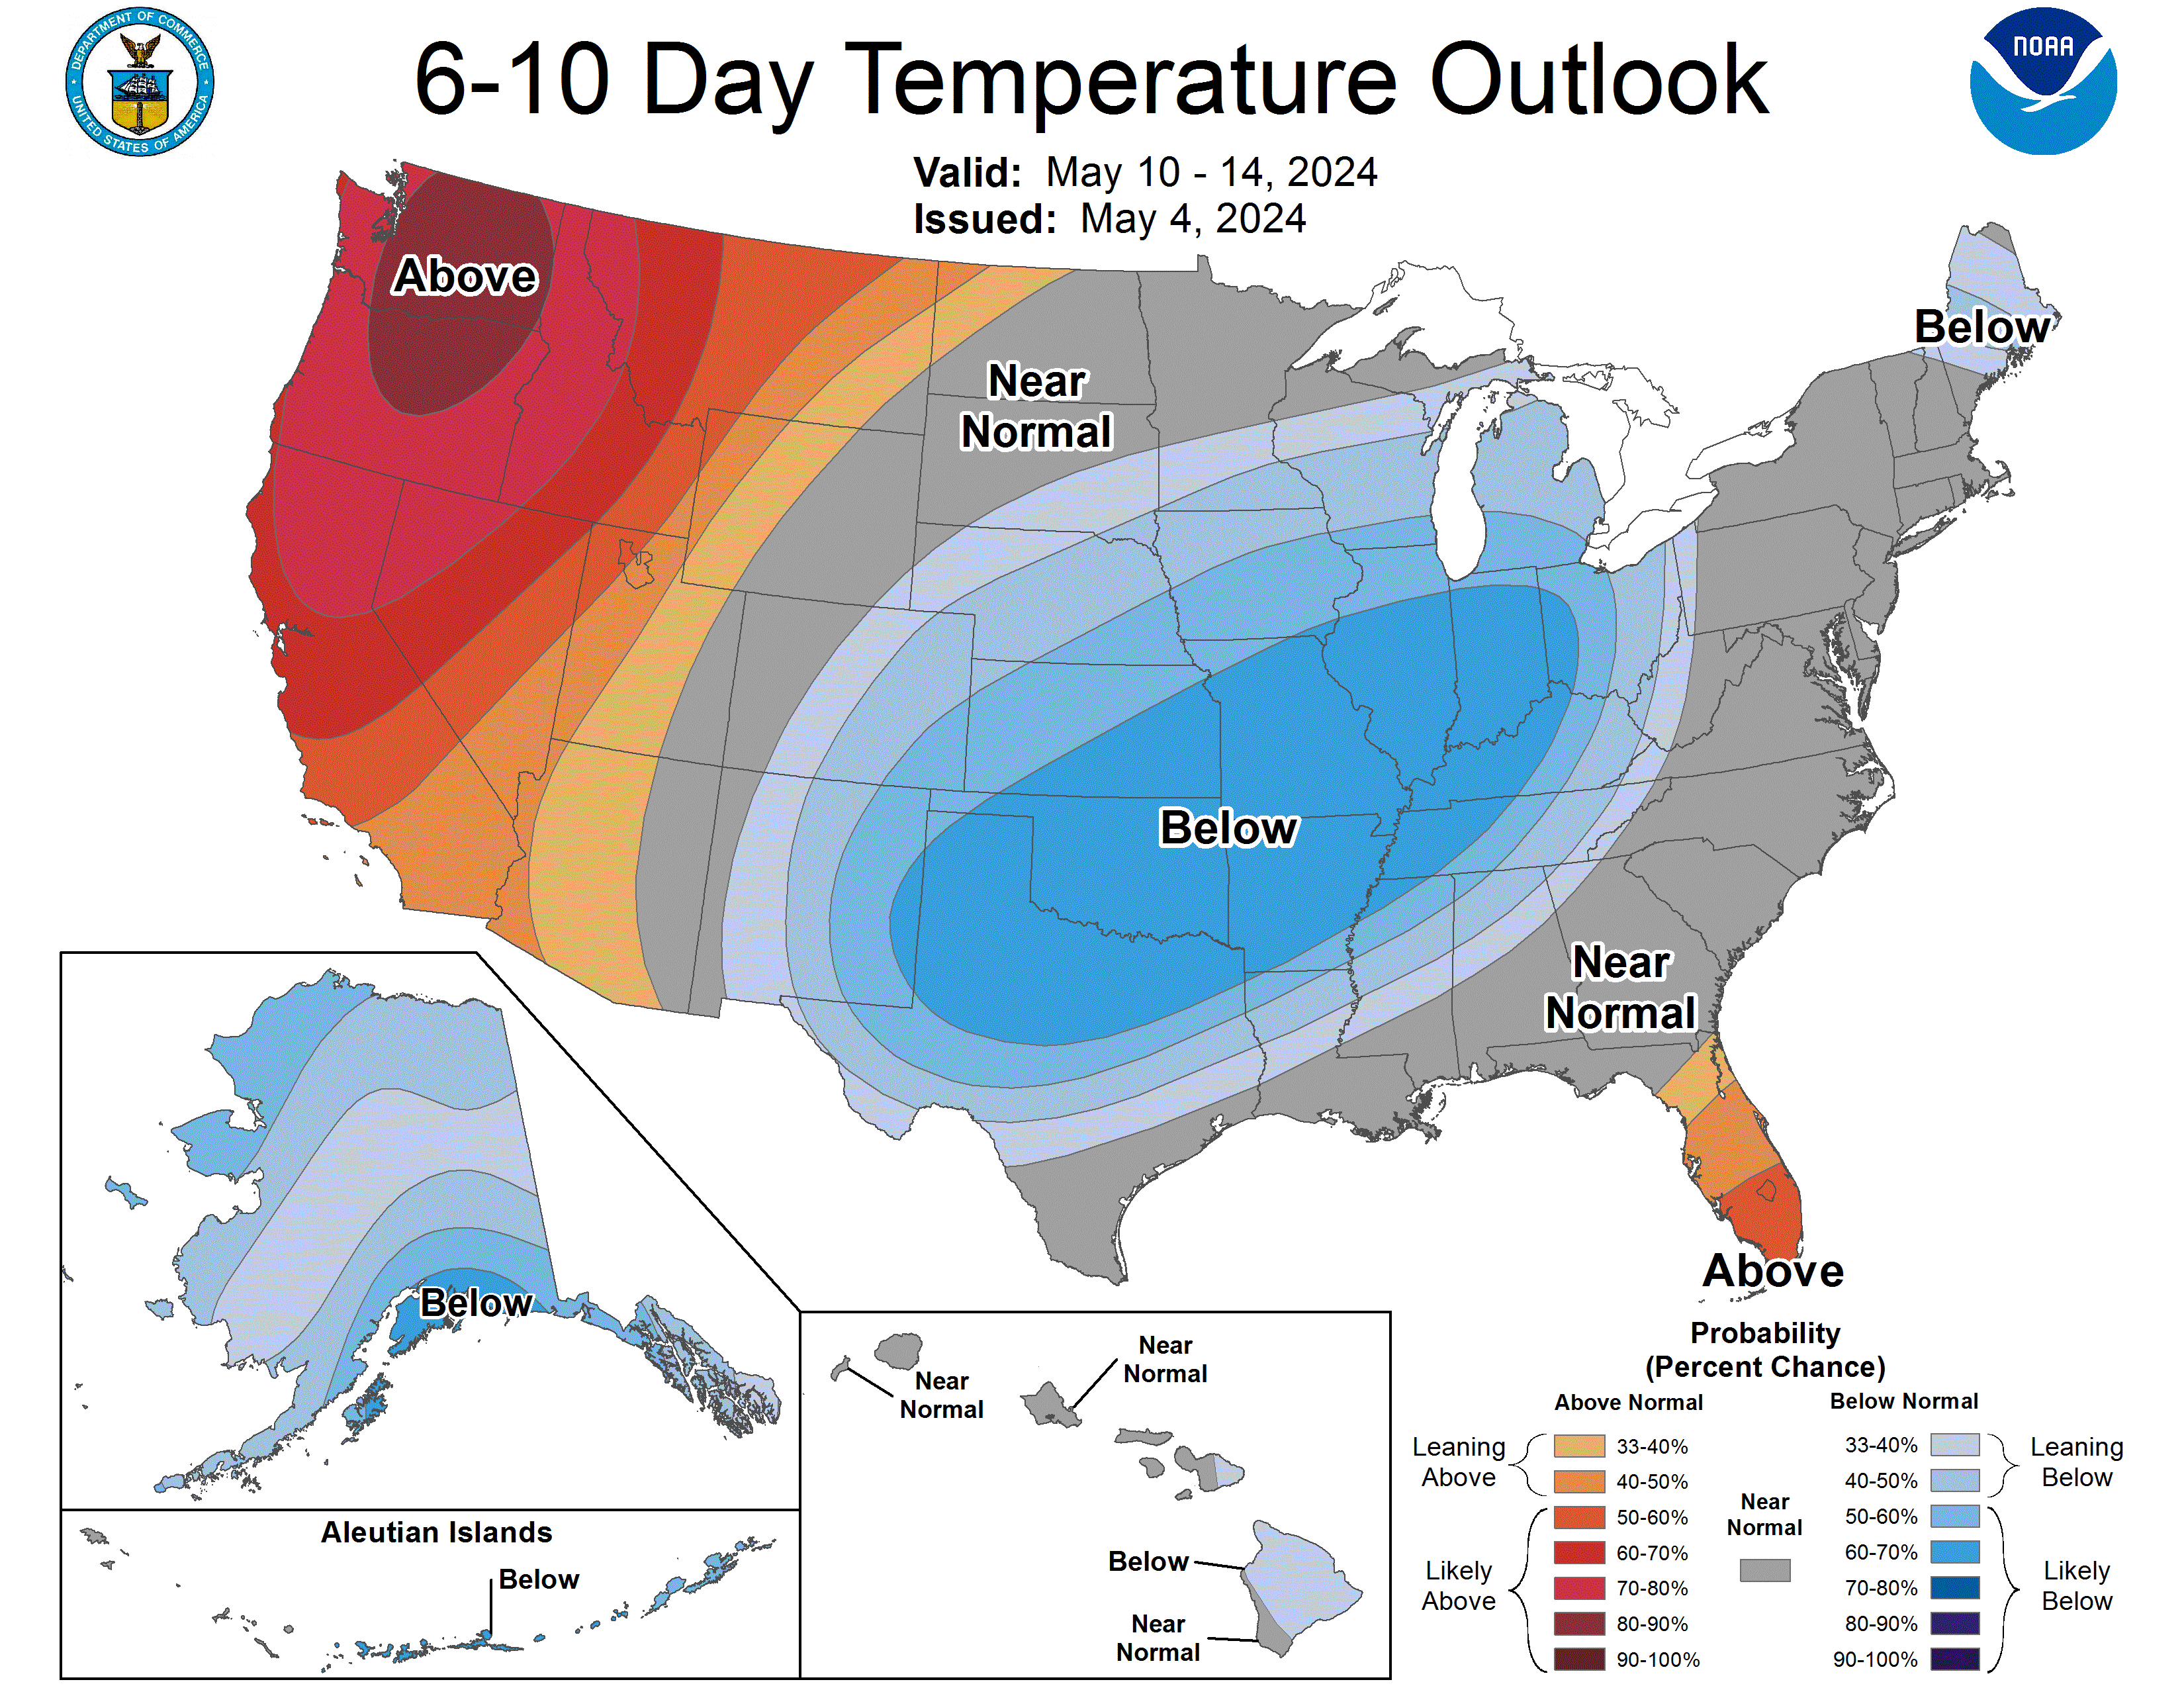 8-14 day temp outlook